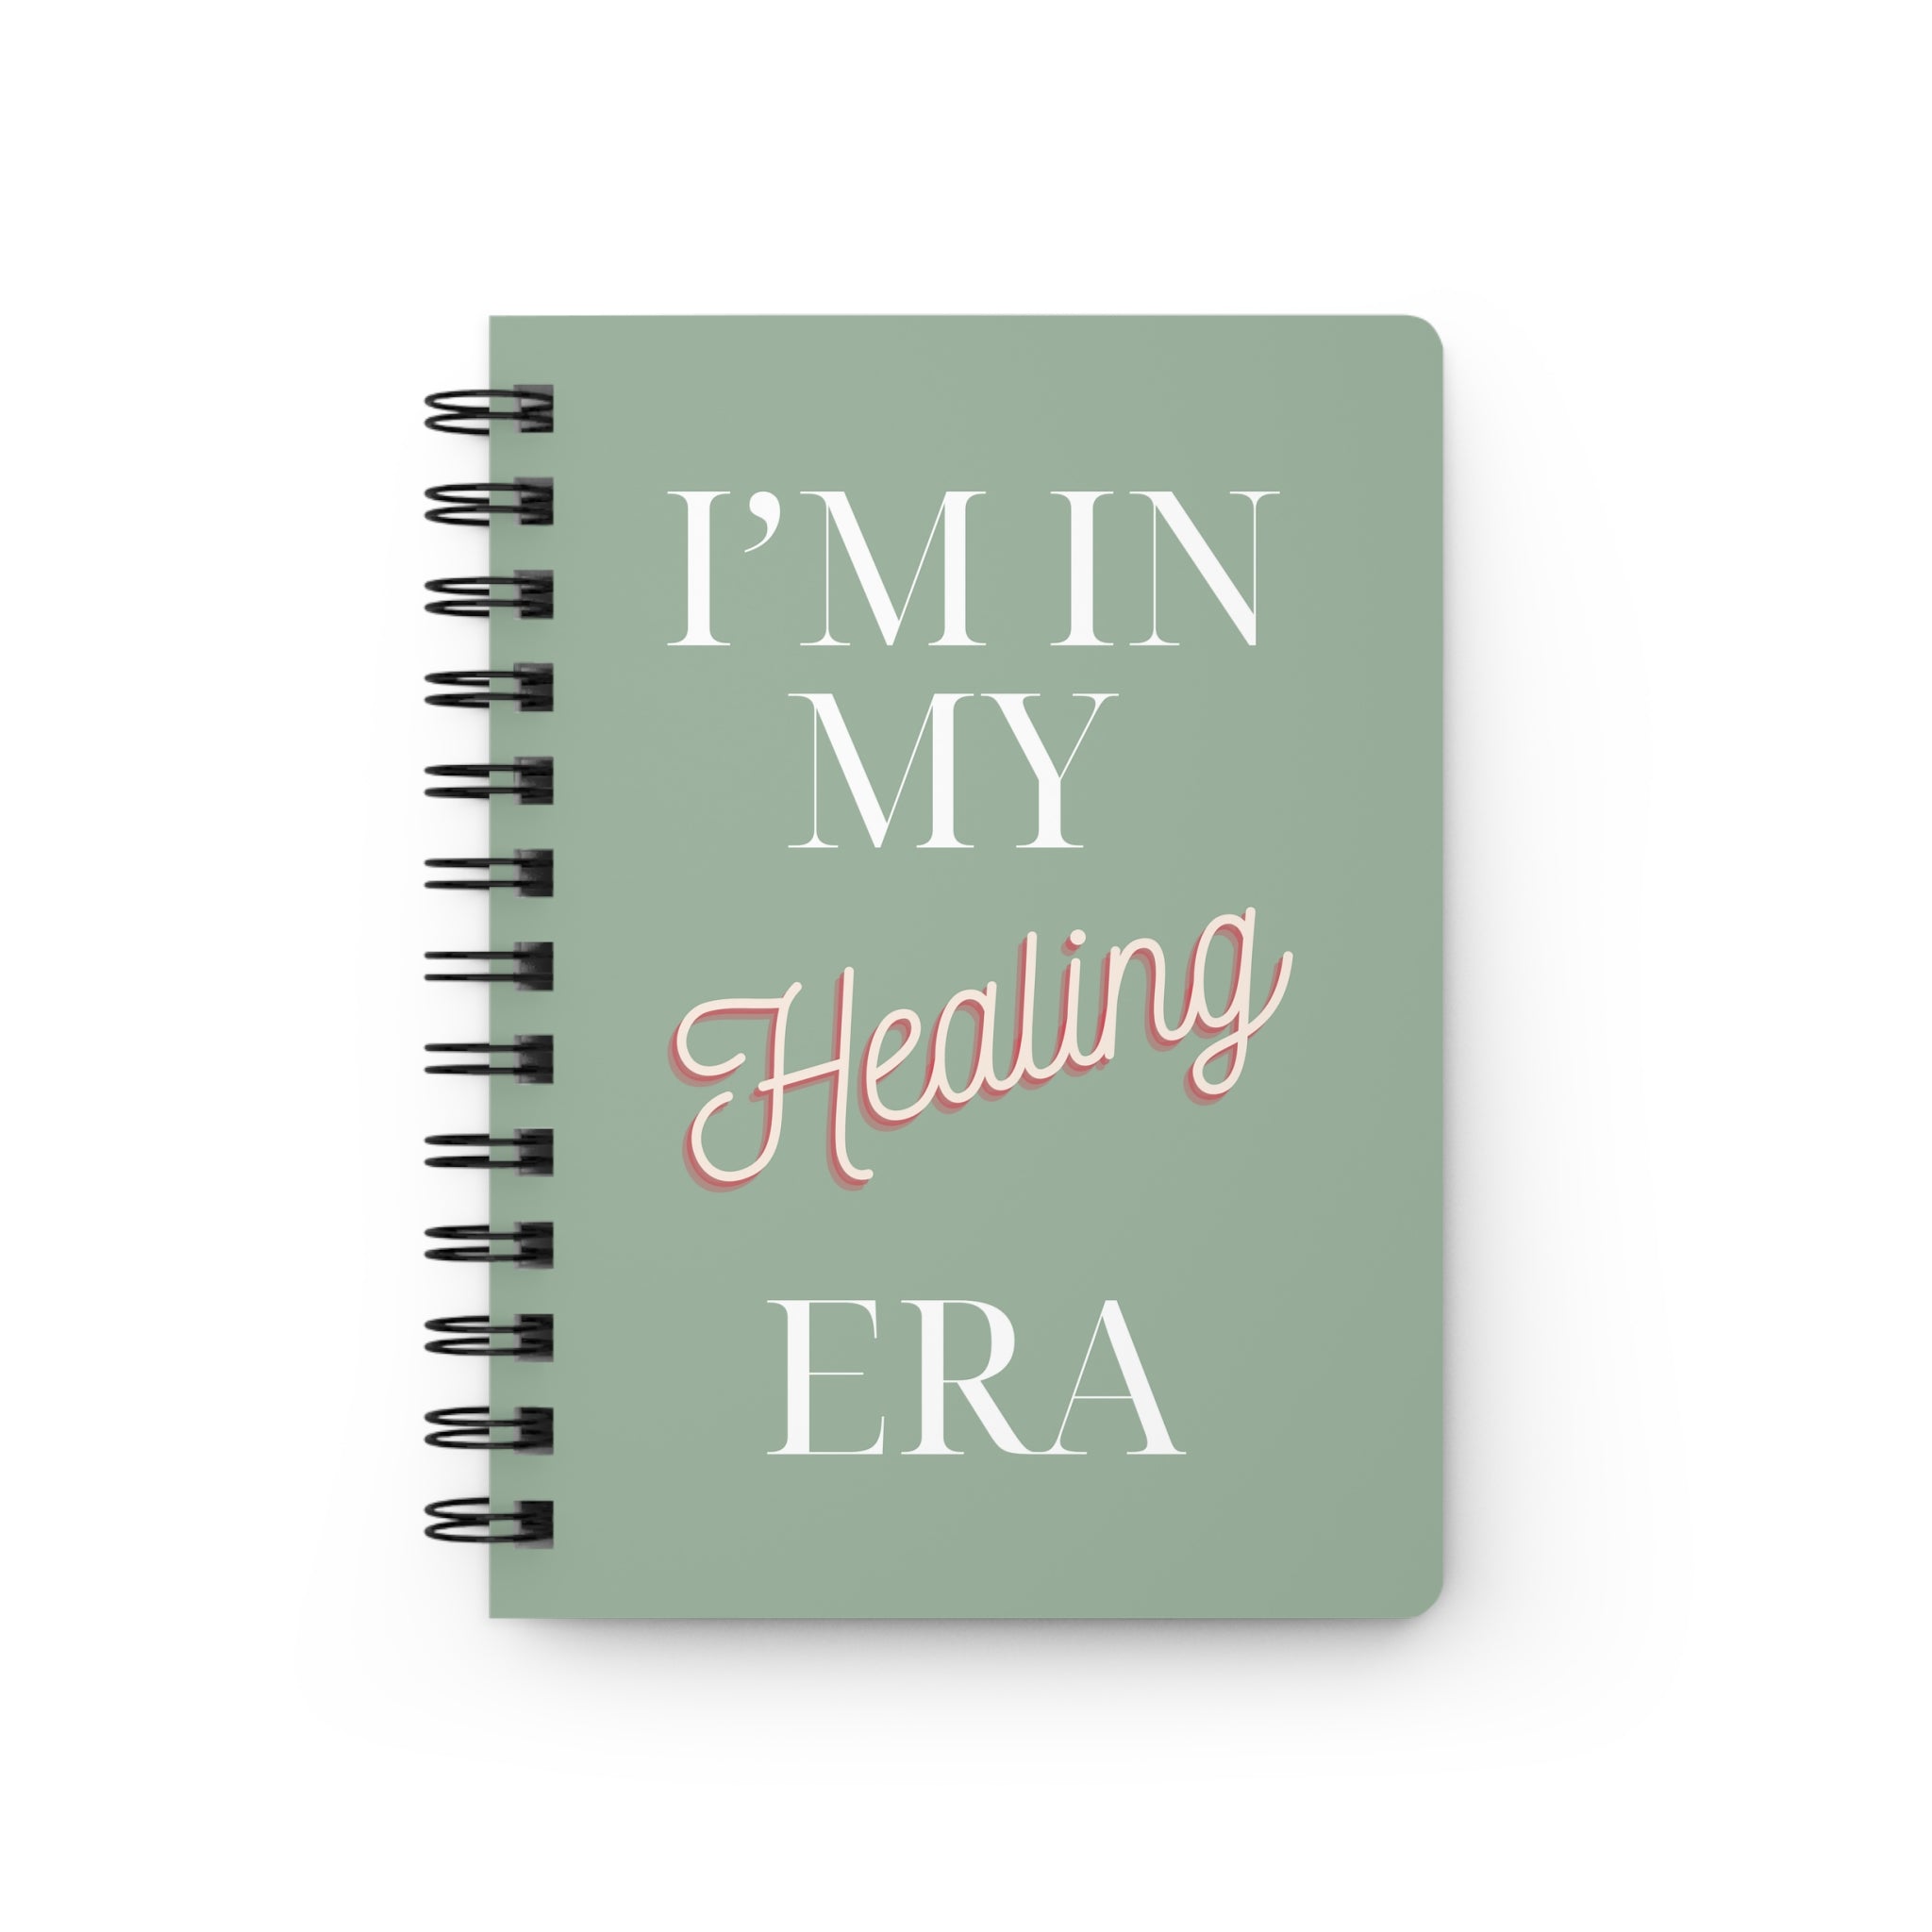 "I'm in my Healing Era" - inner cover detail --5x7 Spiral Bound Journal, 150 pages